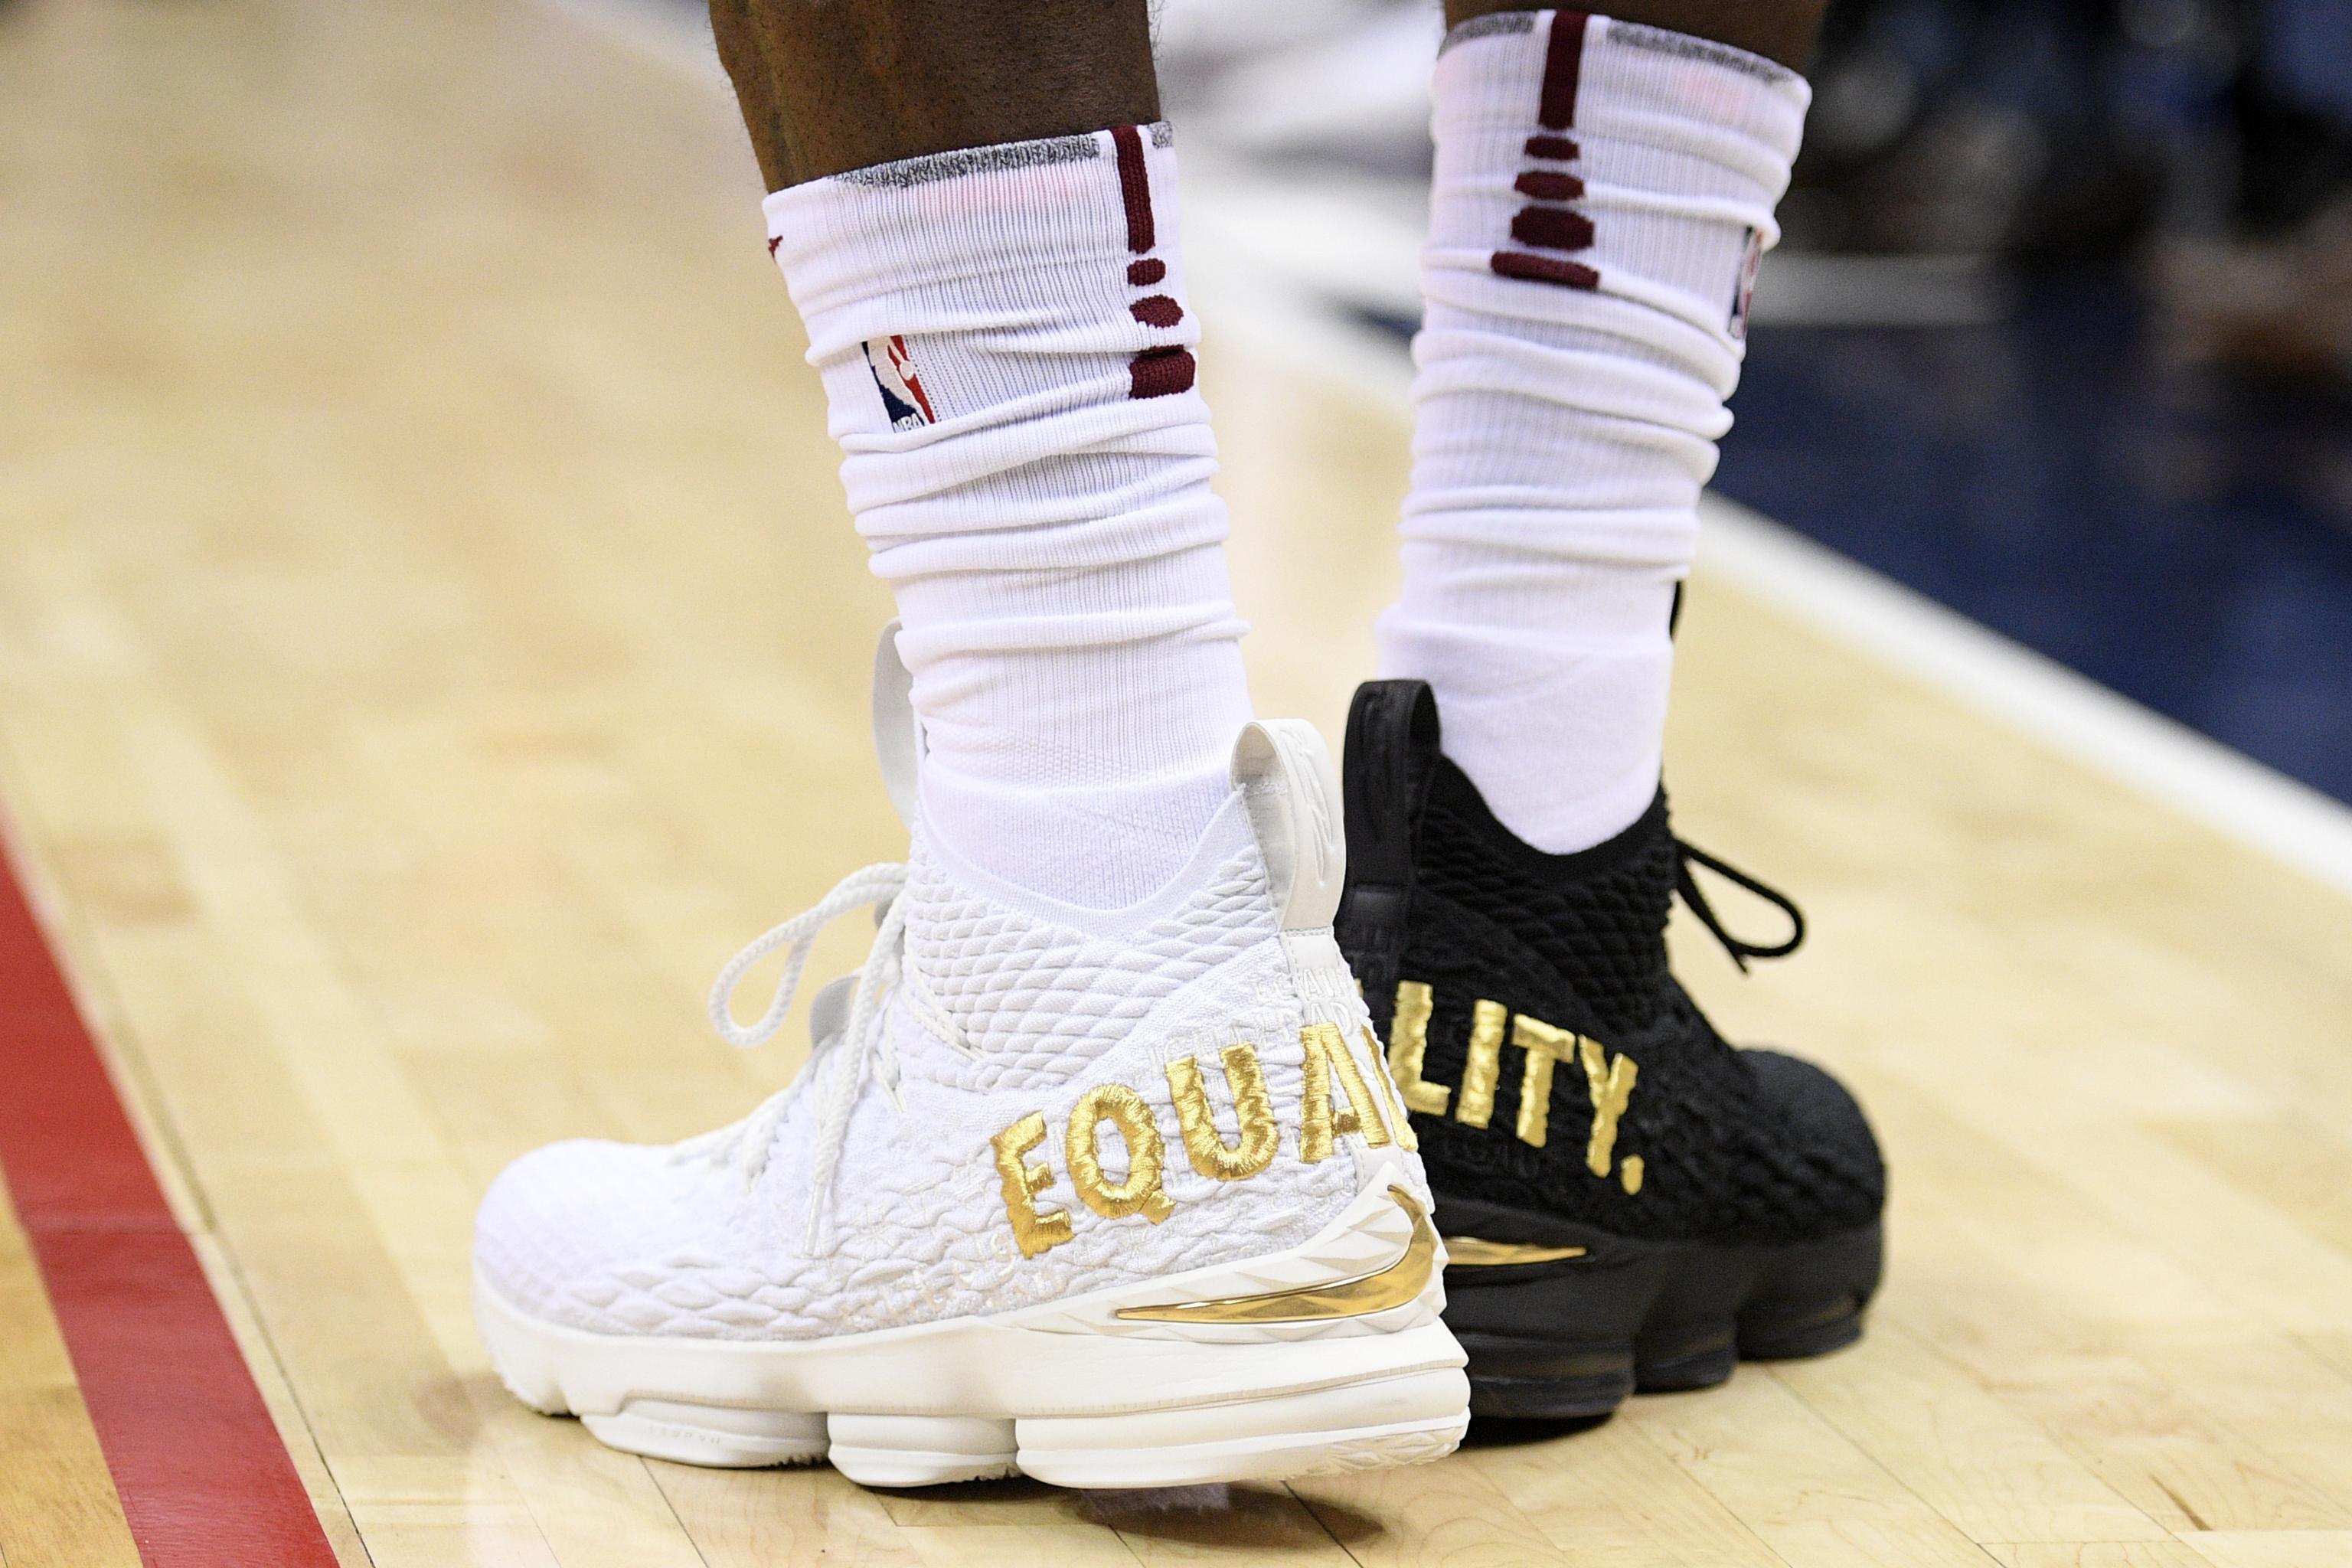 LeBron equality lebrons James on Wearing 'Equality' Shoes: 'Not Going to Let 1